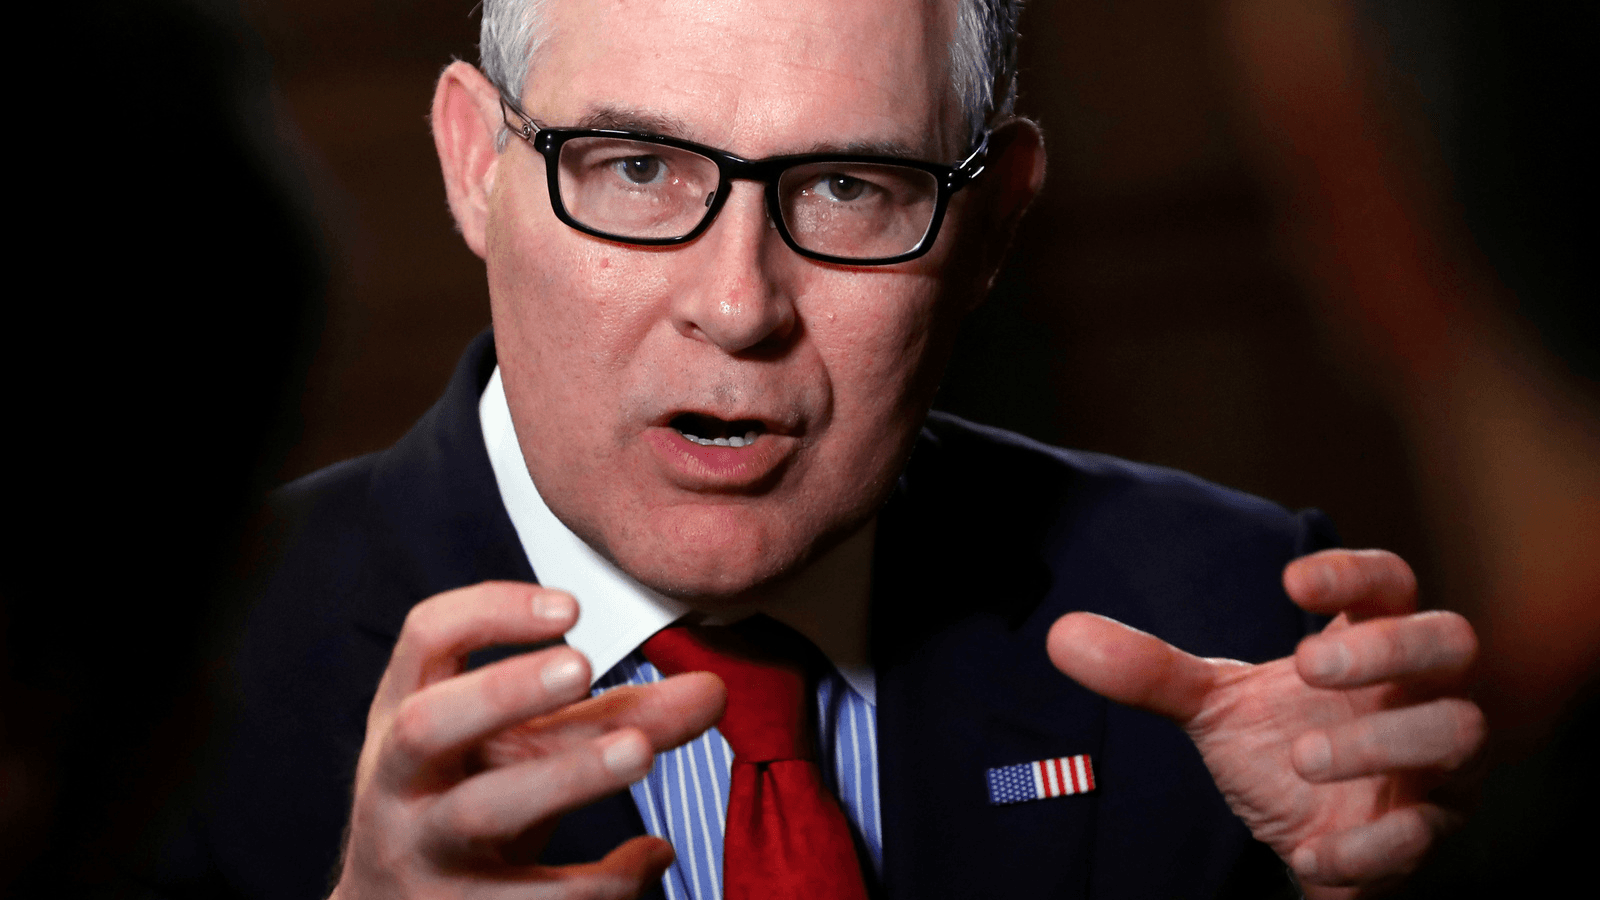 Environmental Protection Agency Administrator Scott Pruitt speaks during an interview with Reuters journalists in Washington, Jan. 9, 2018.